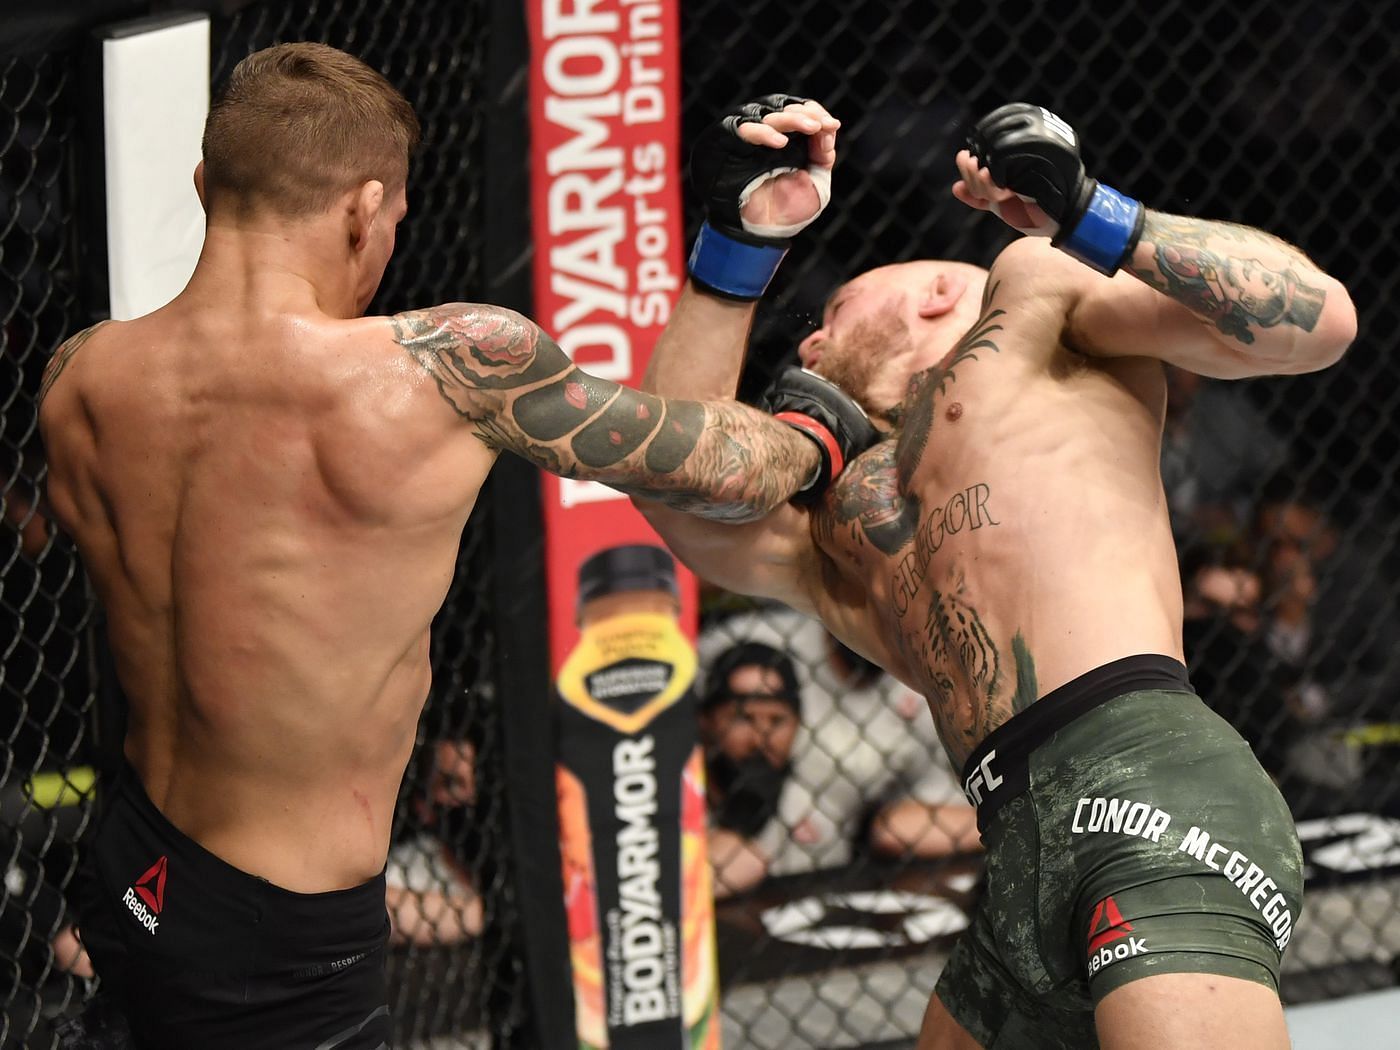 Dustin Poirier turned the tables on Conor McGregor with this violent KO at UFC 257